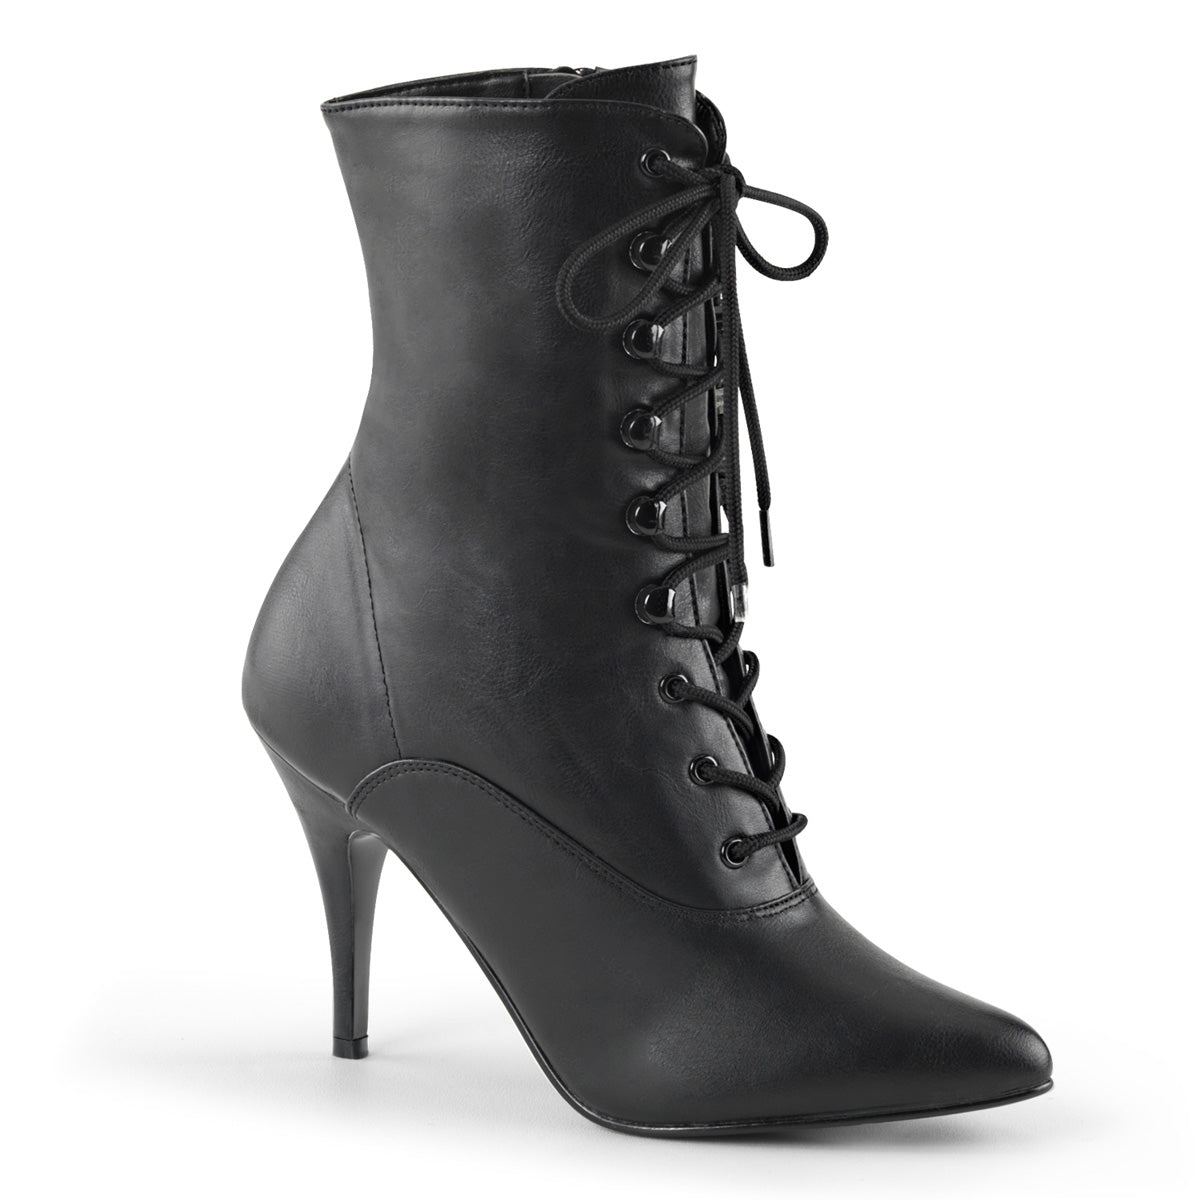 VANITY-1020 Pleaser Ankle Boots 4" Heel Black Fetish Shoes-Pleaser- Sexy Shoes